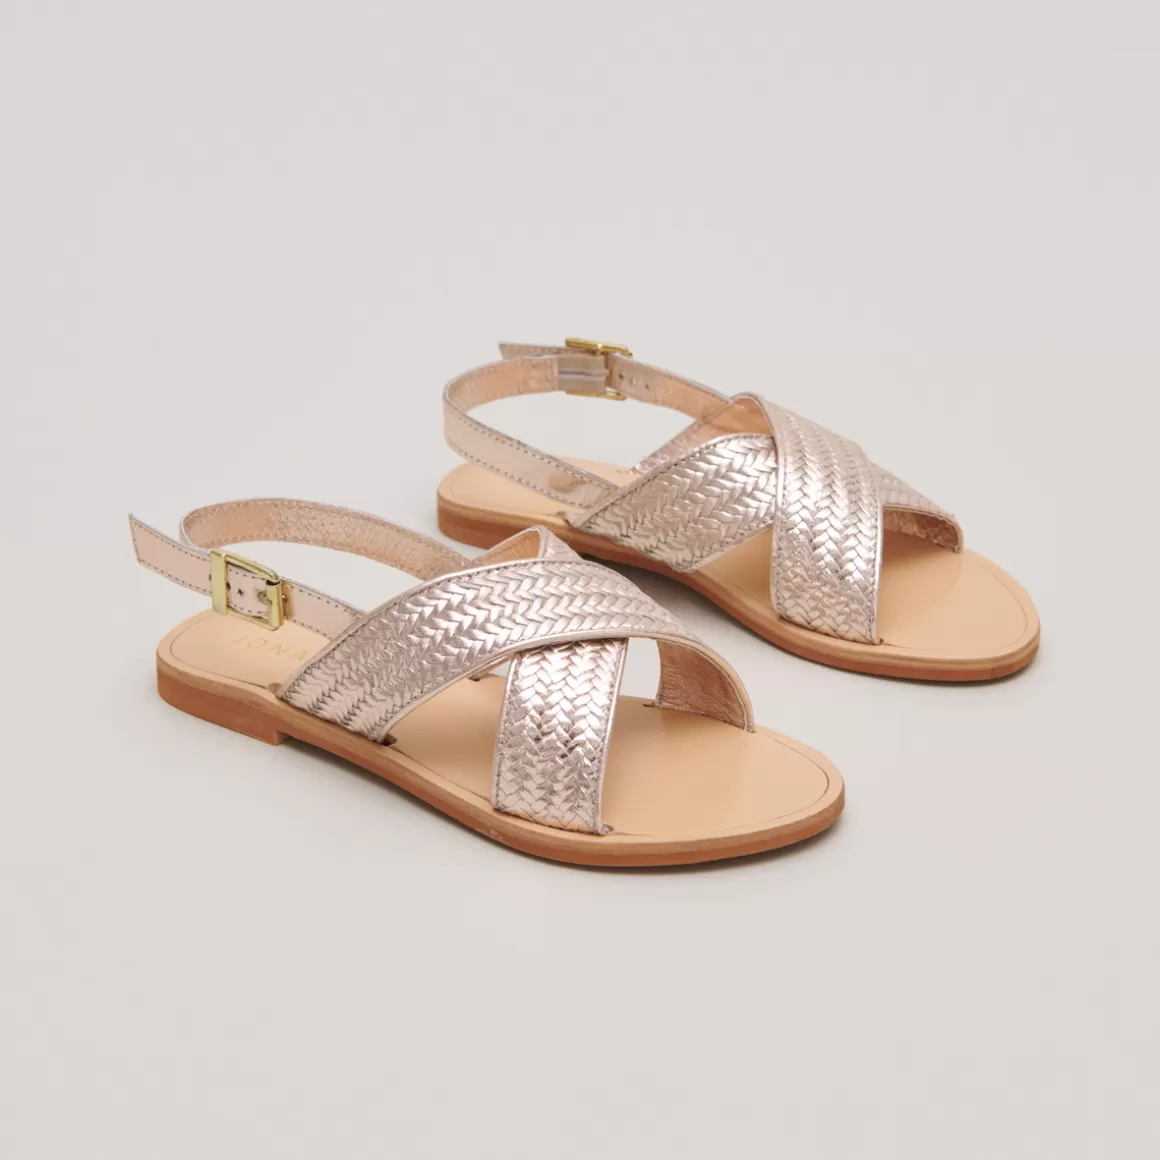 Flat sandals with broad straps<Jonak Store